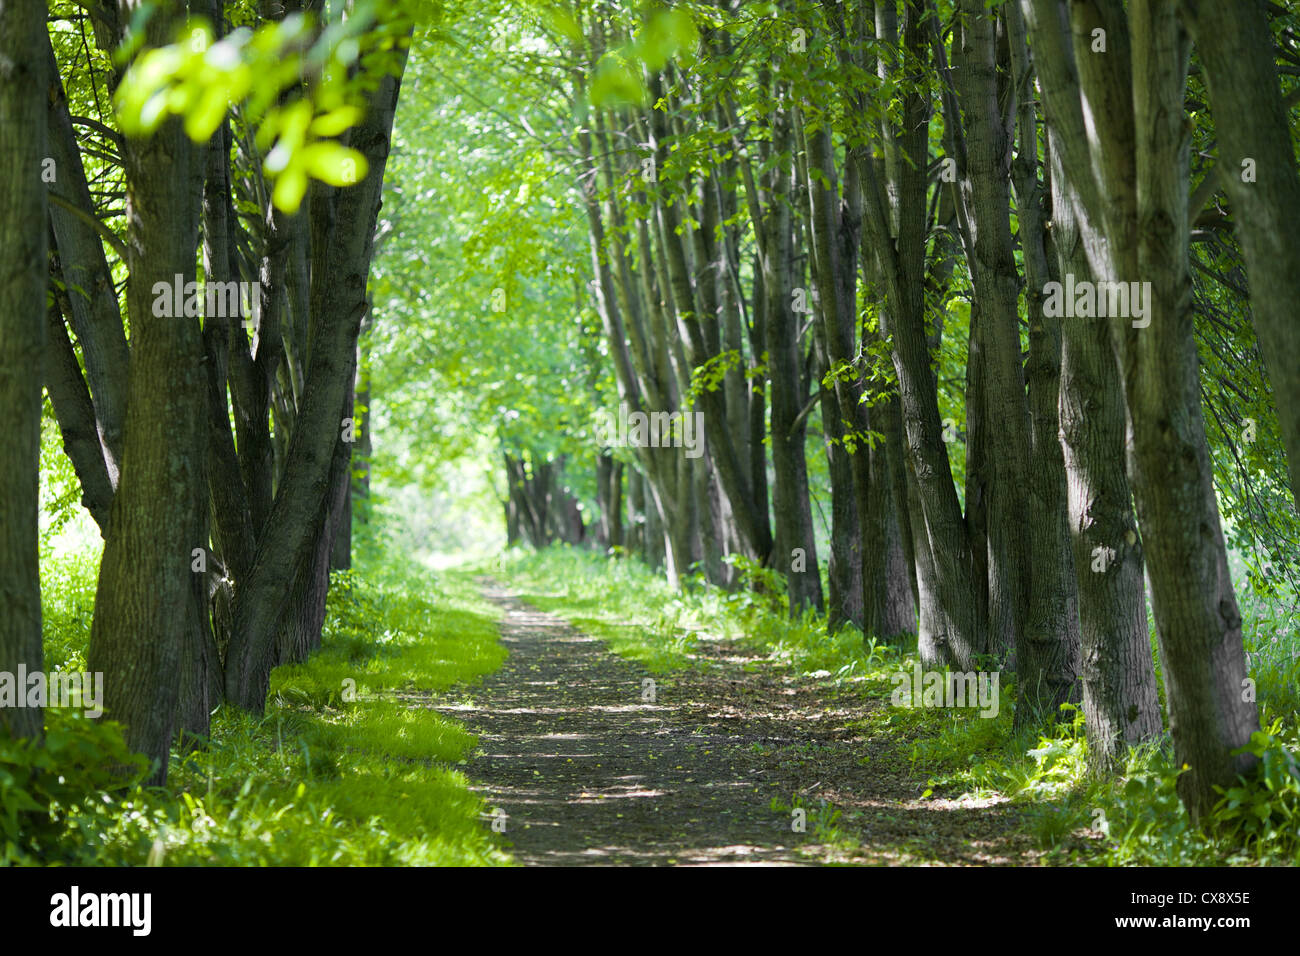 basswood alley or park Stock Photo